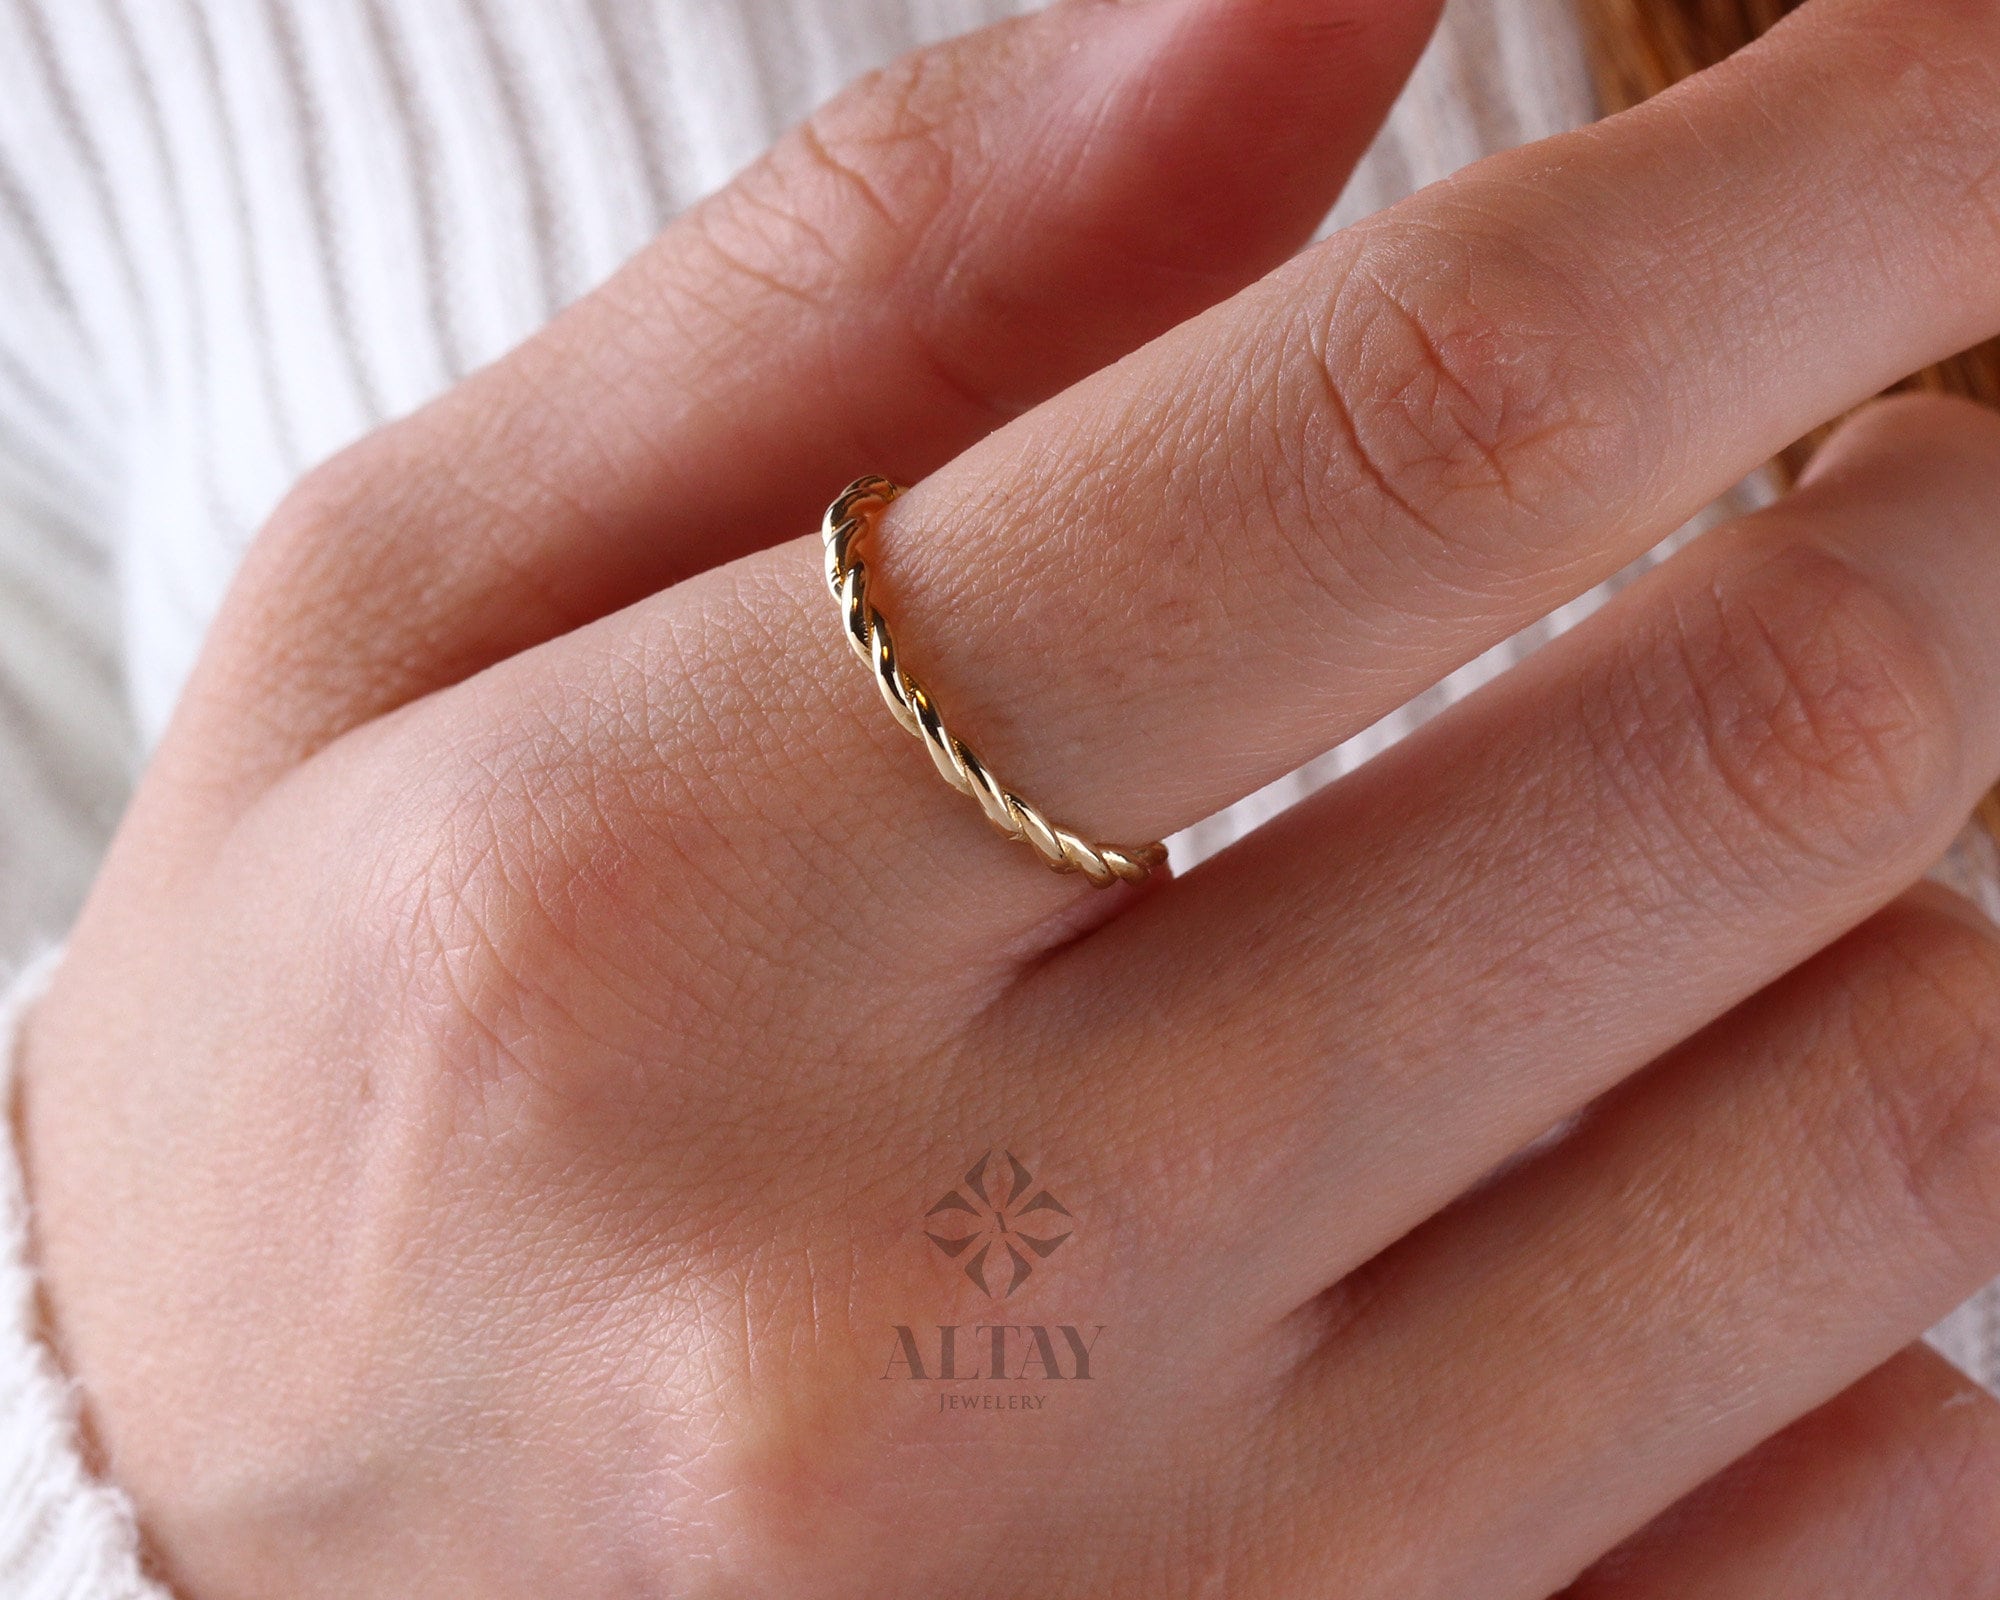 14K Solid Gold Twist Ring, Rope Style Twisted Gold Ring, Dainty Stacking Ring, Simple Delicate Stack Twist Ring, Thin Twist Wedding Band